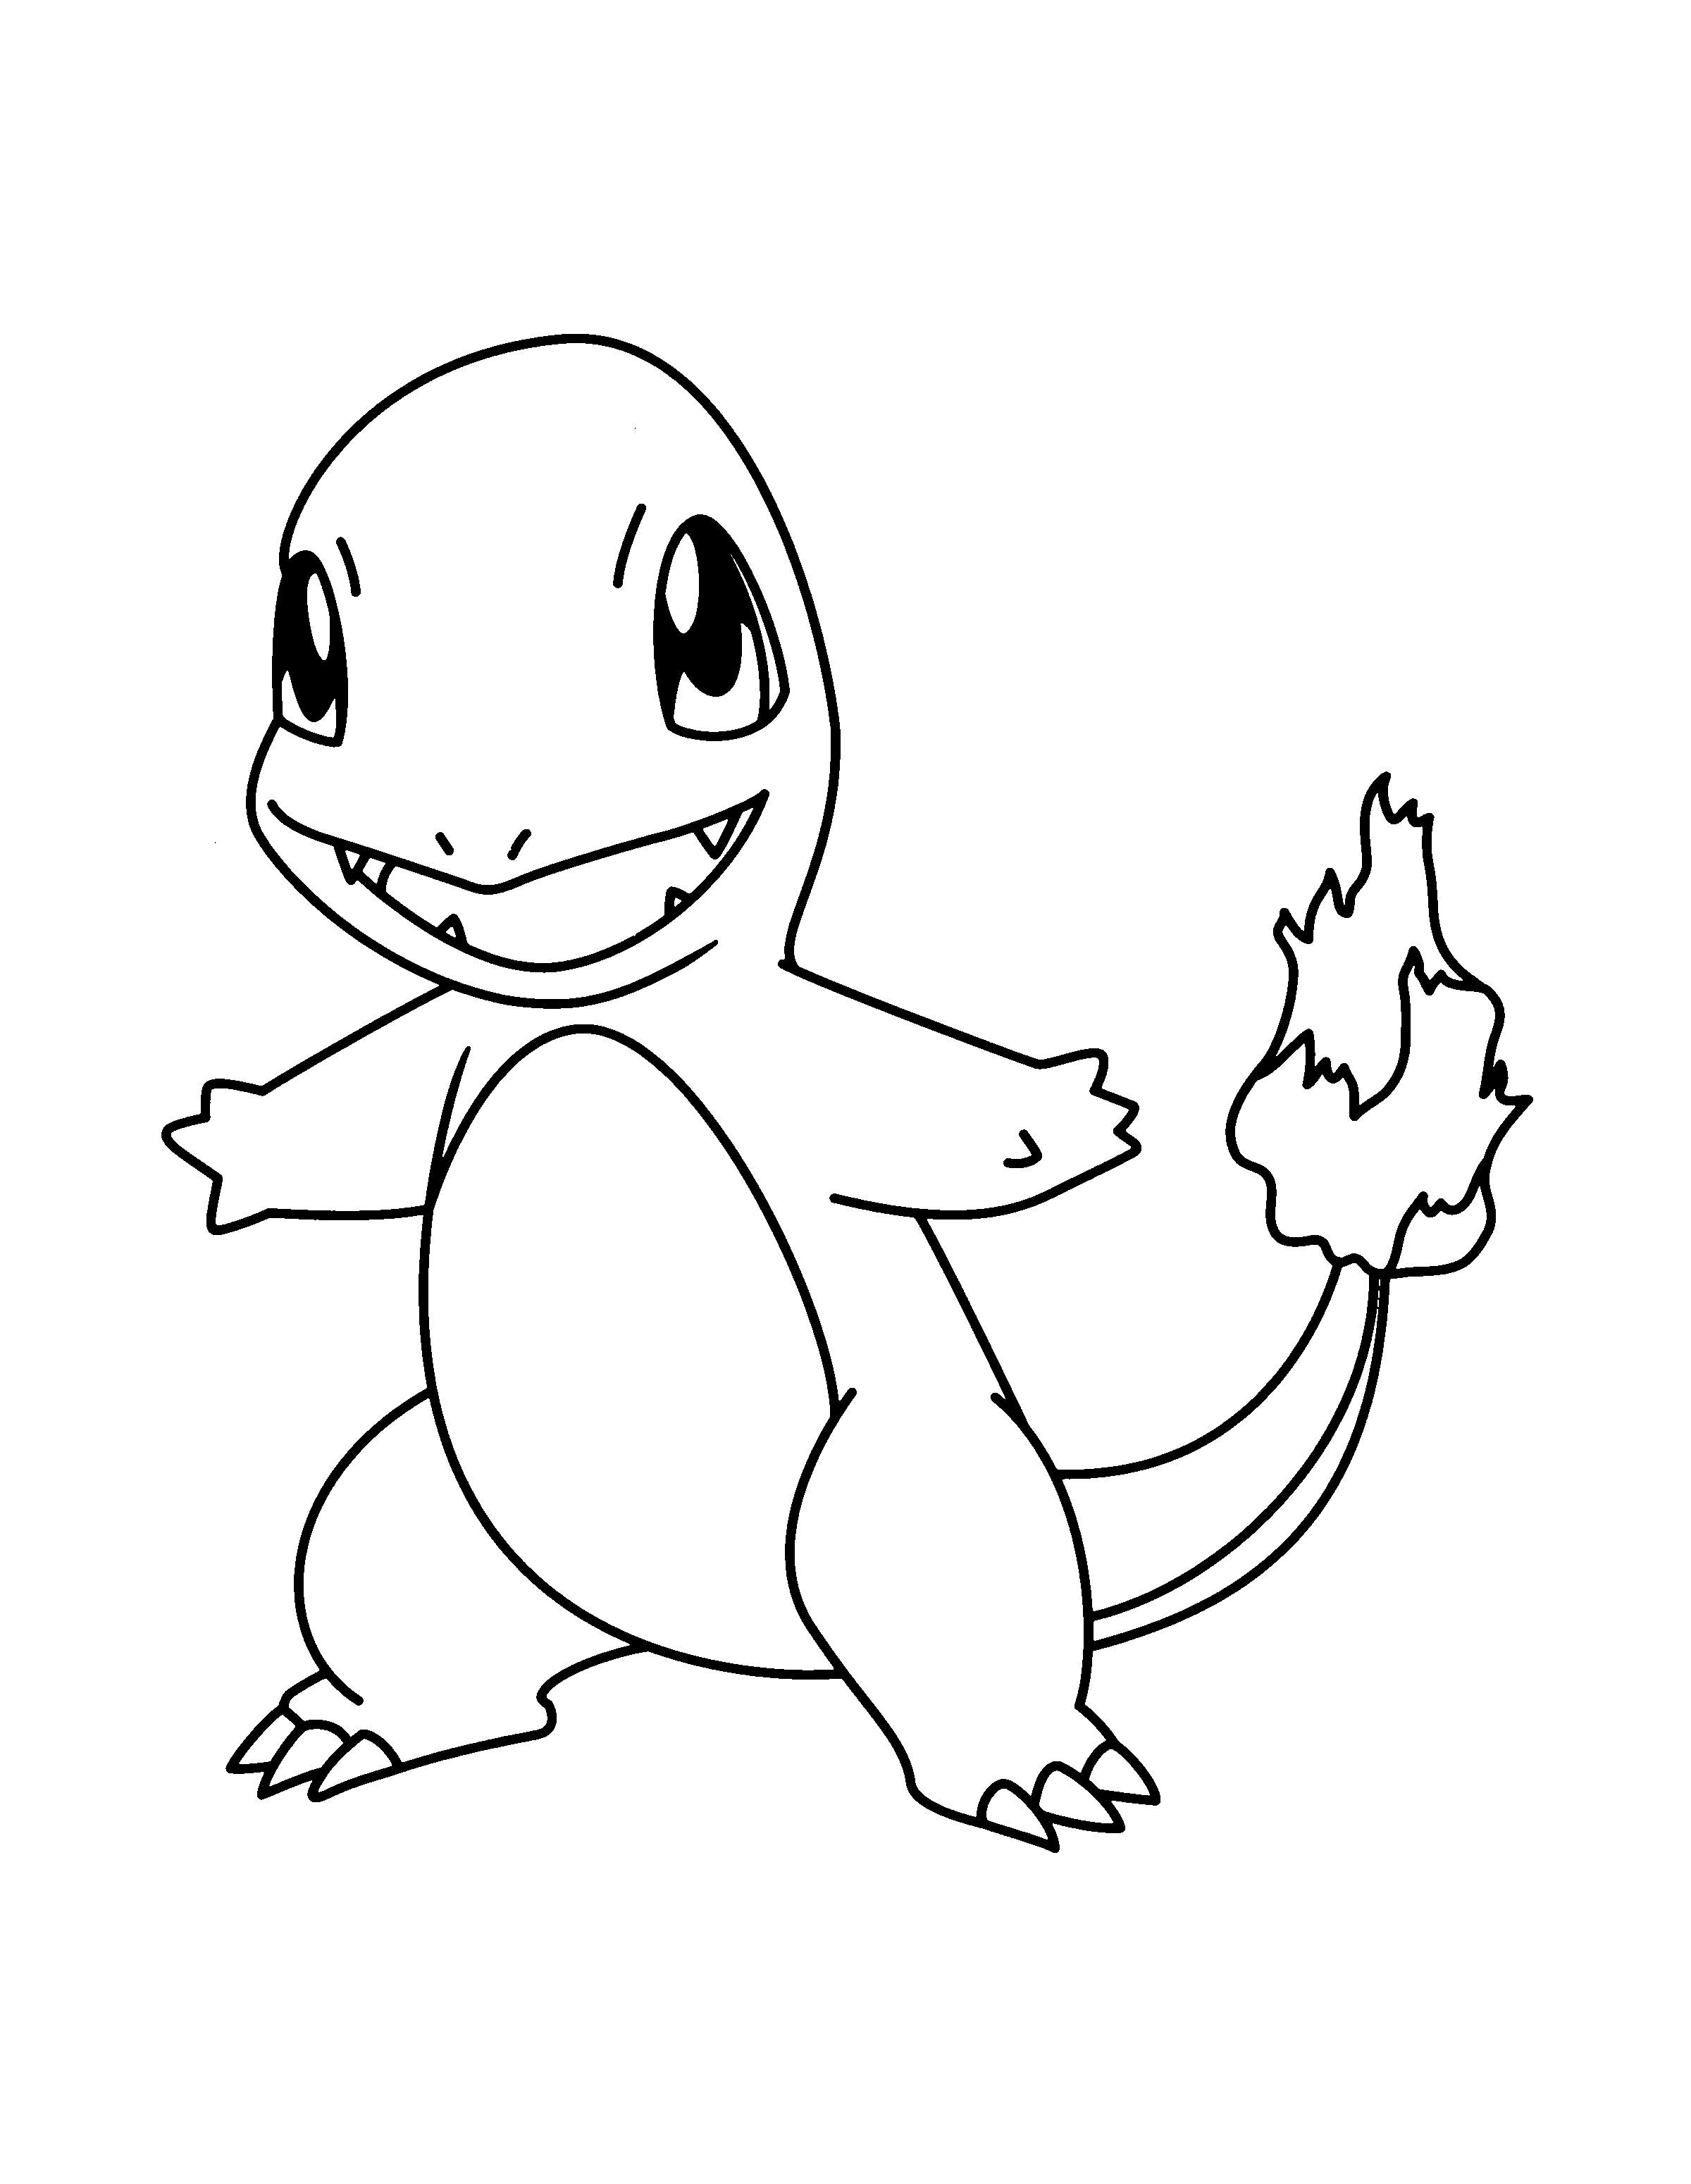 93 printable pokemon coloring pages your toddler will love. Free Pokemon Charmander Coloring Pages Download Free Clip Art Free Clip Art On Clipart Library